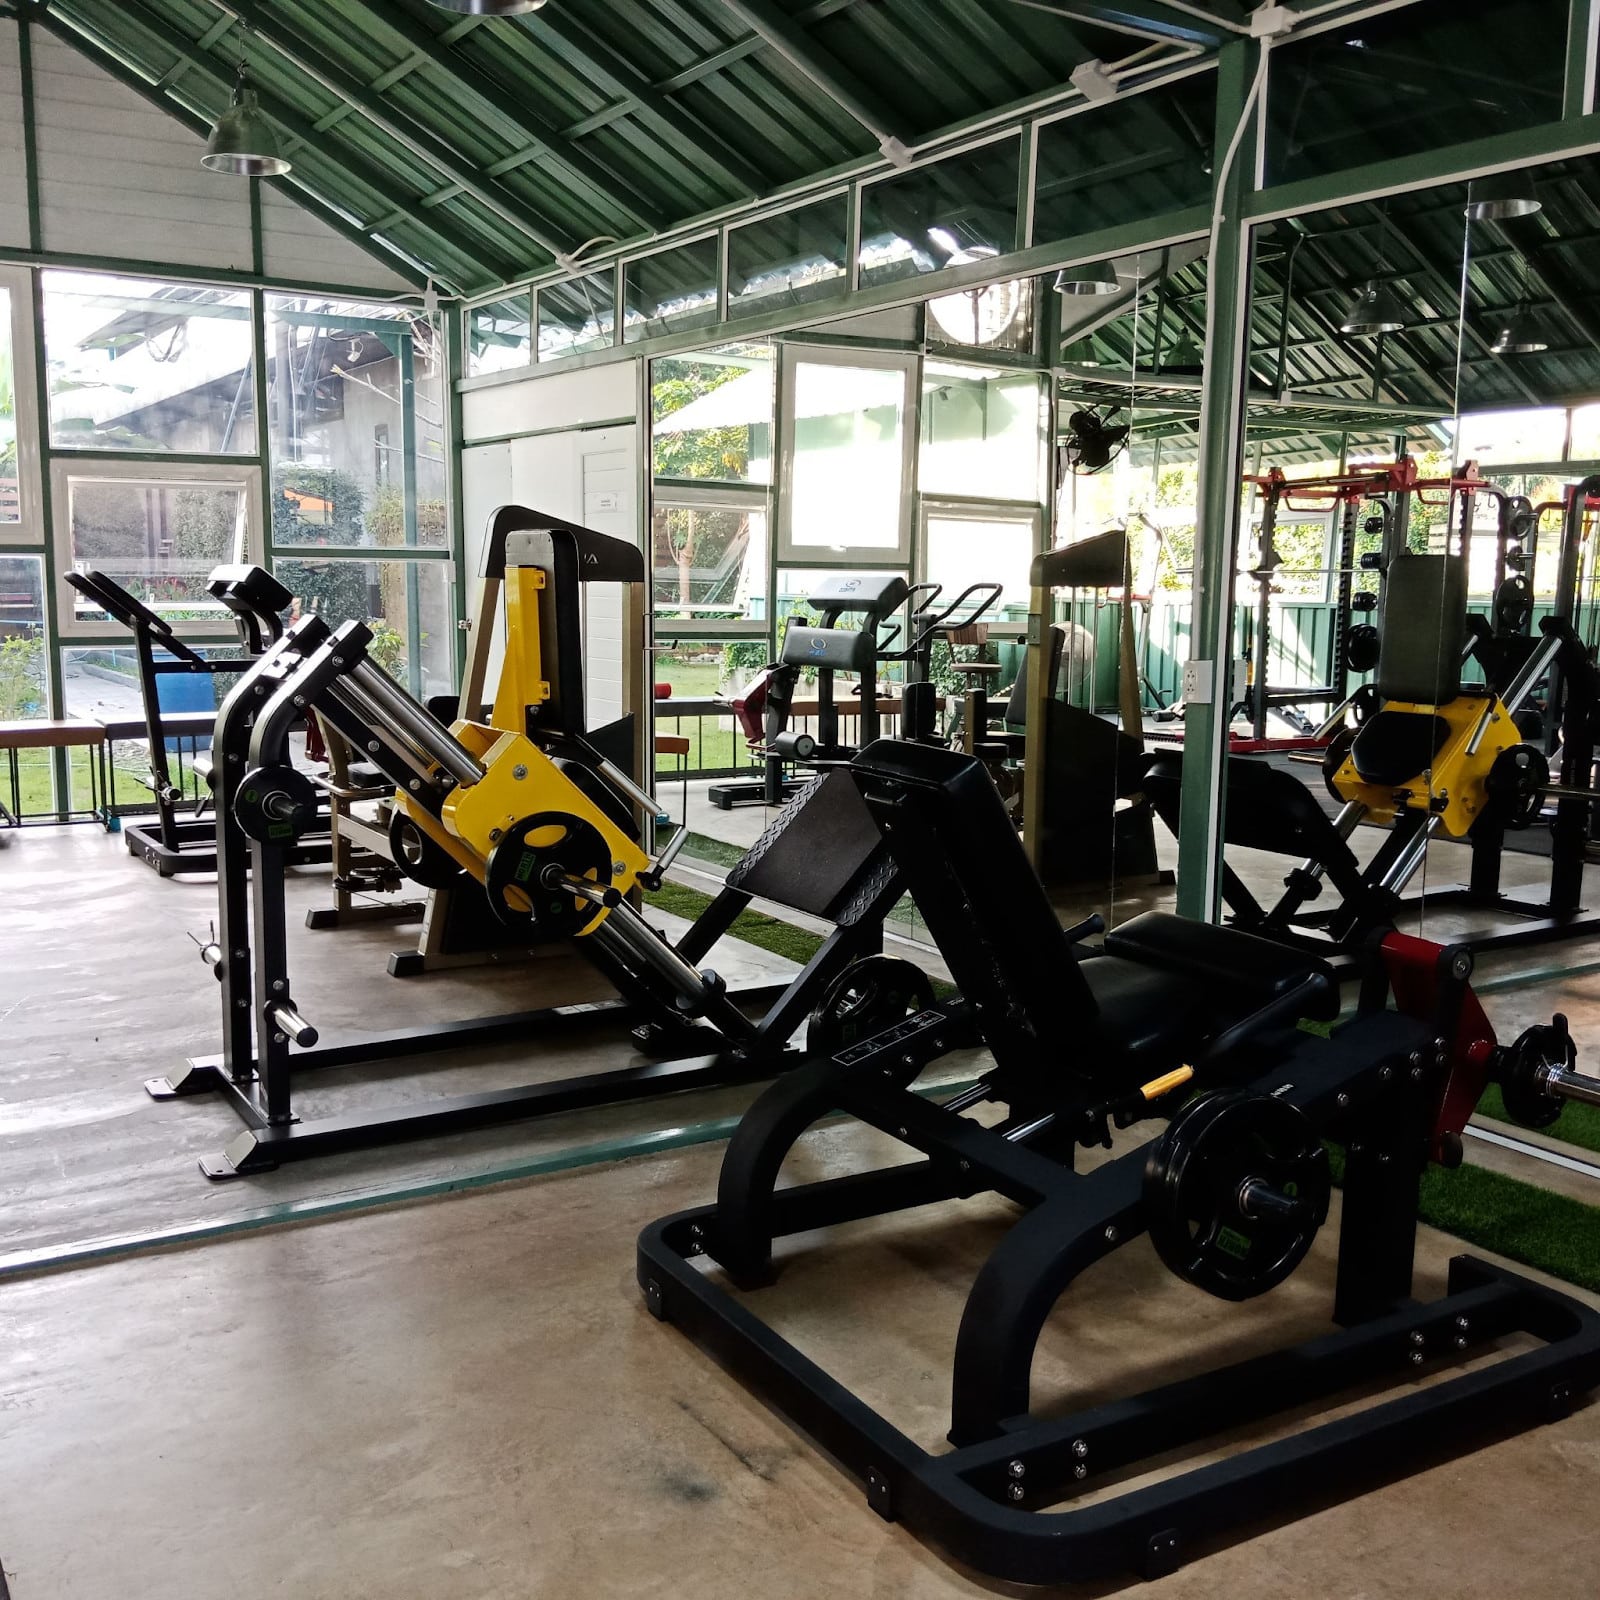 The Hero Gym in Surat Thani